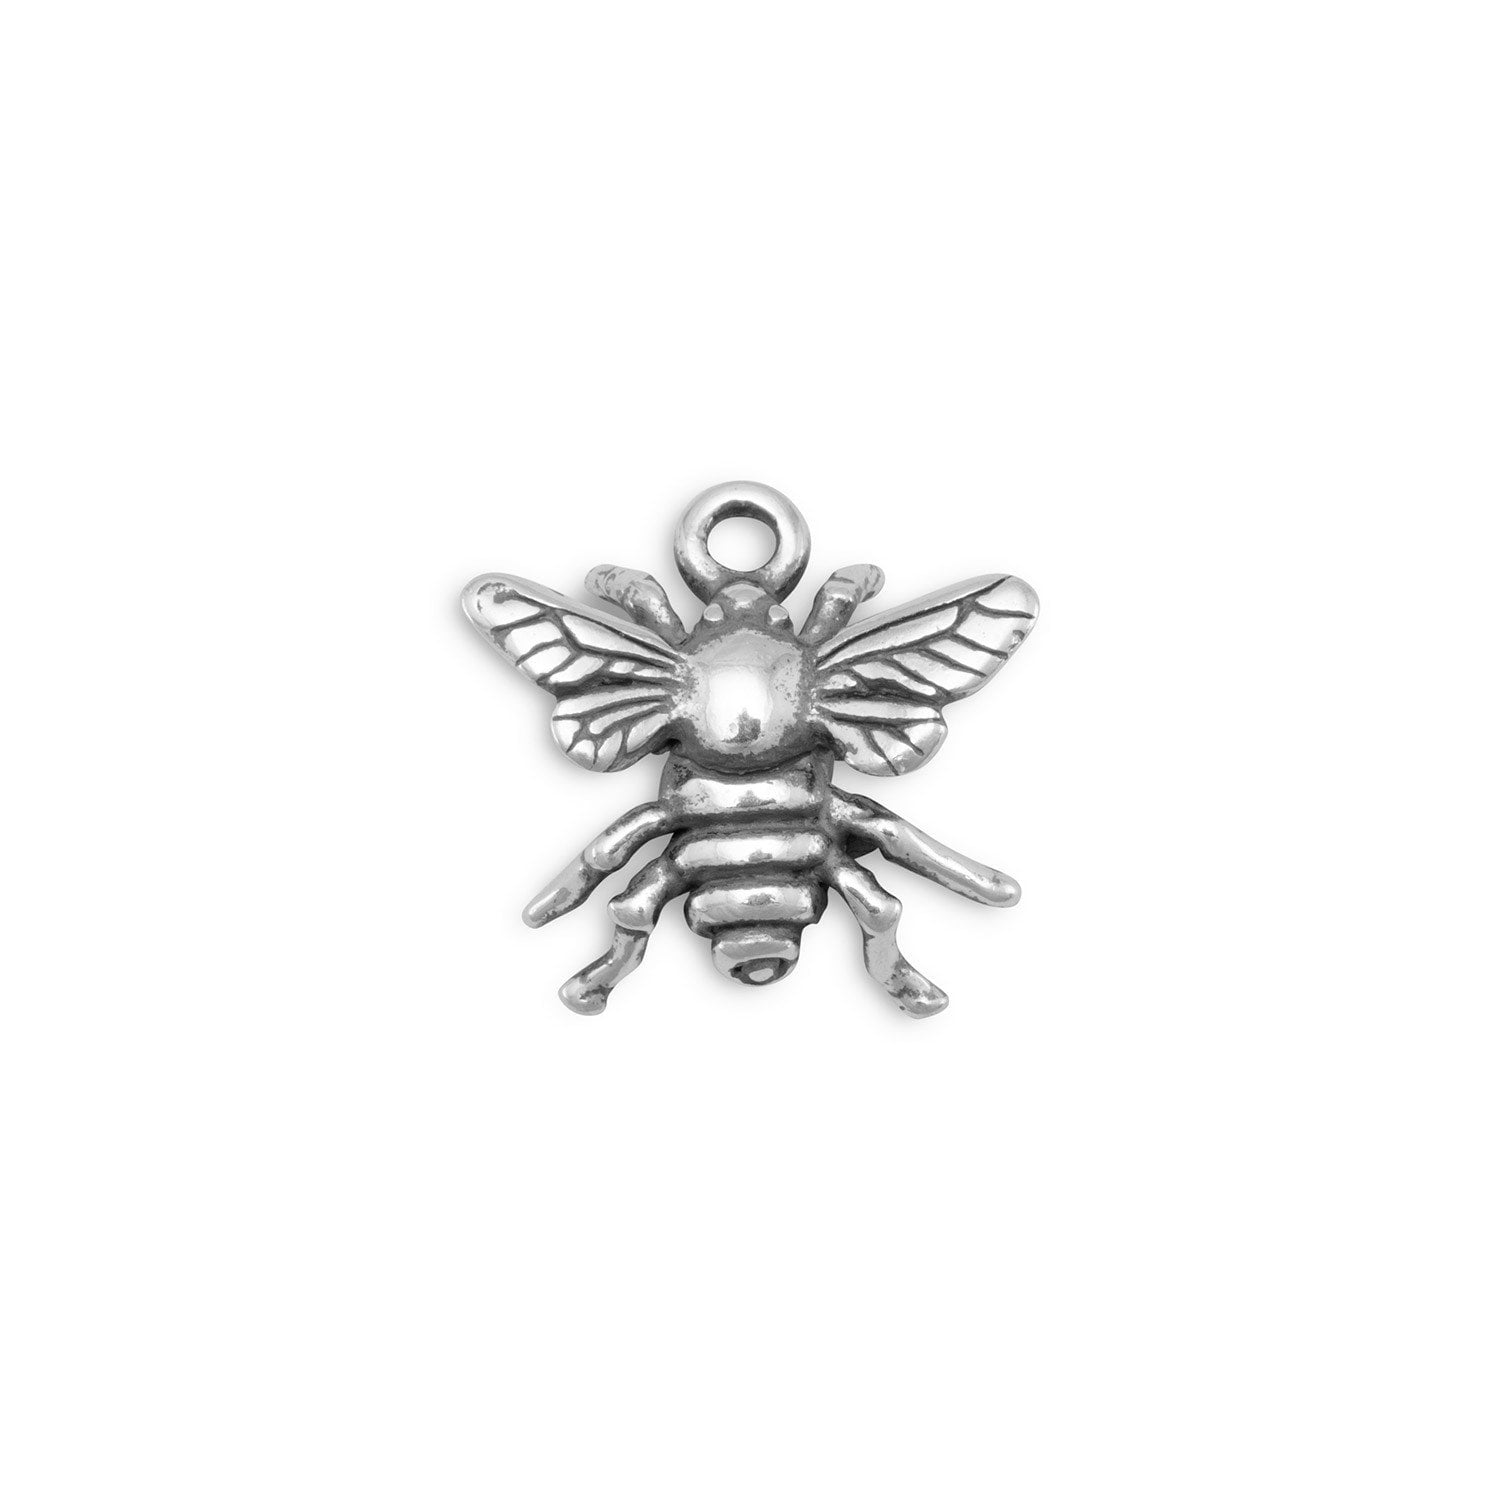 Queenberry Sterling Silver Smile Honey Bee European Style Bead Charm by Queenberry 